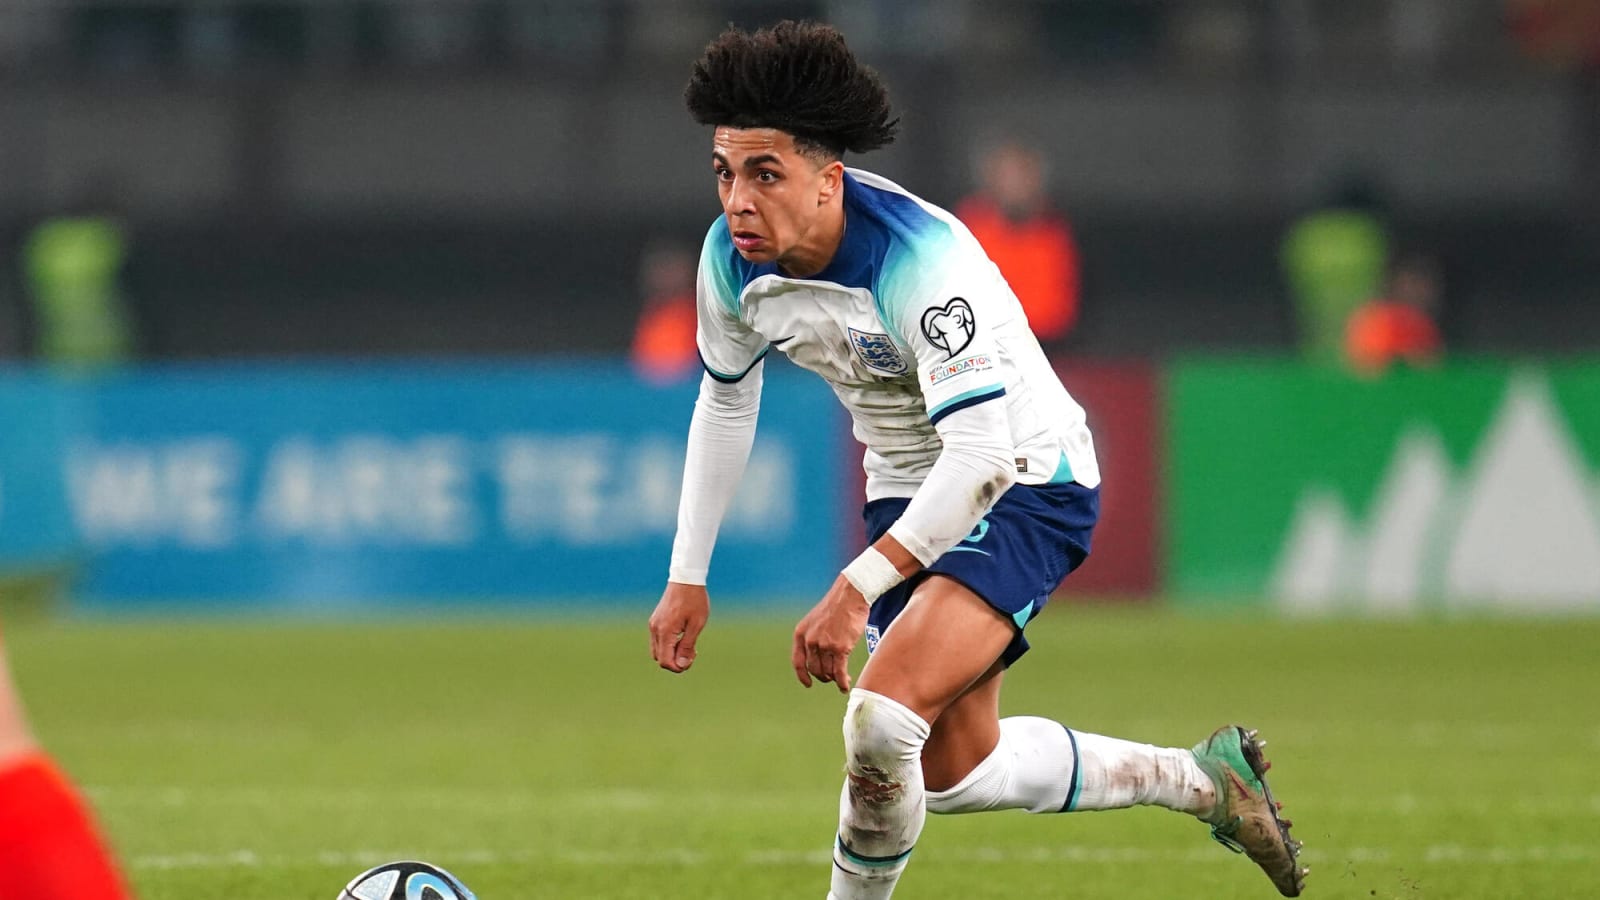 Manchester City youngster Rico Lewis is thrilled with his England debut